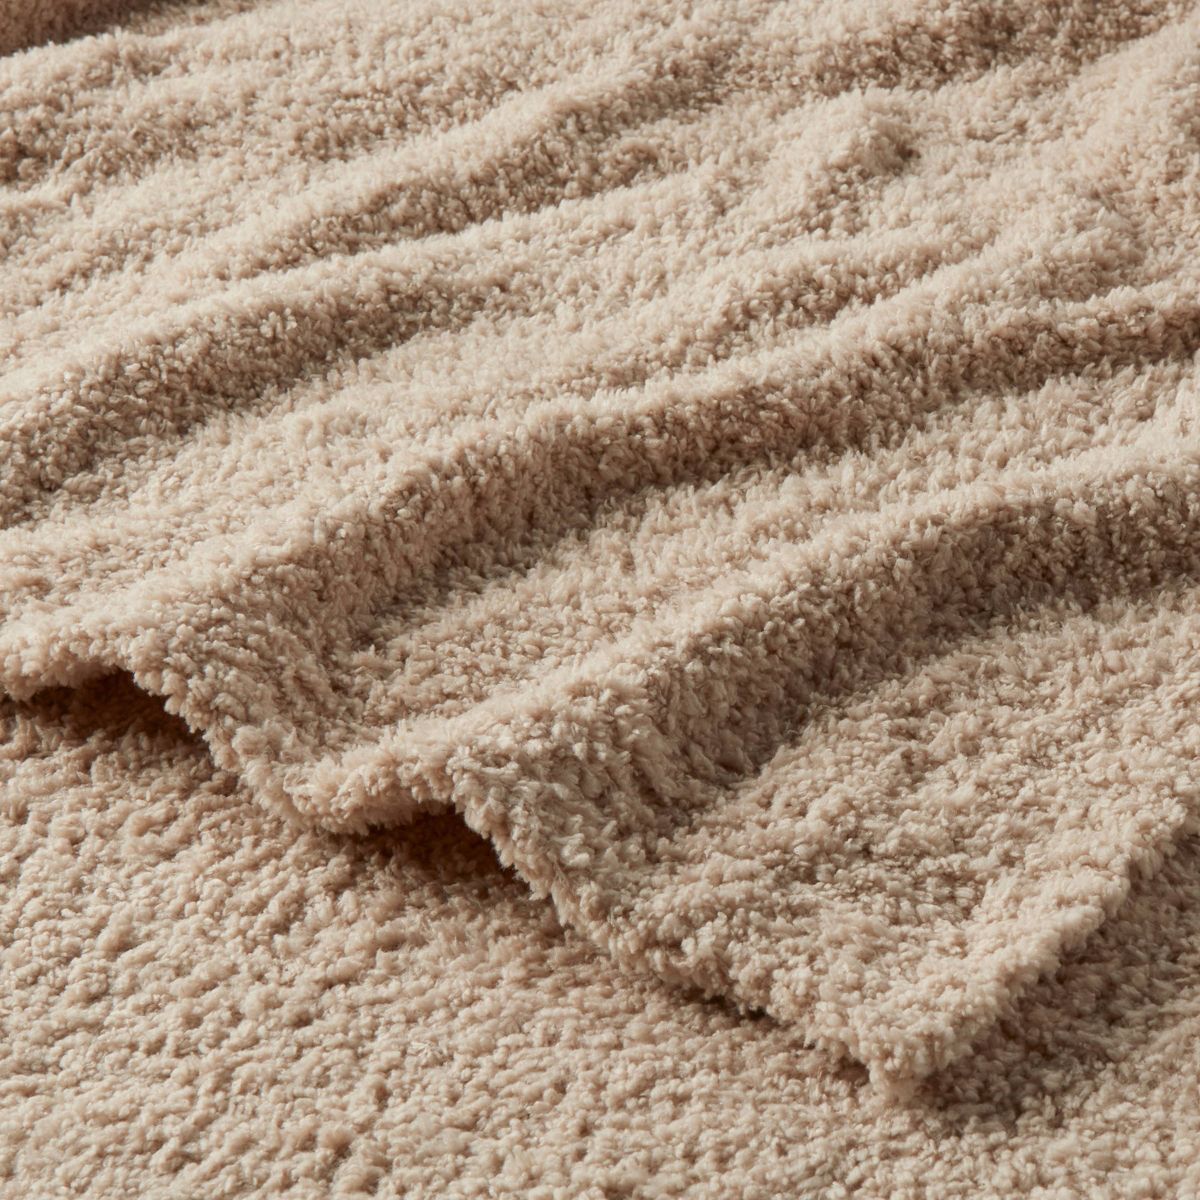 Cozy Chenille Bed Blanket - Threshold™ | Target